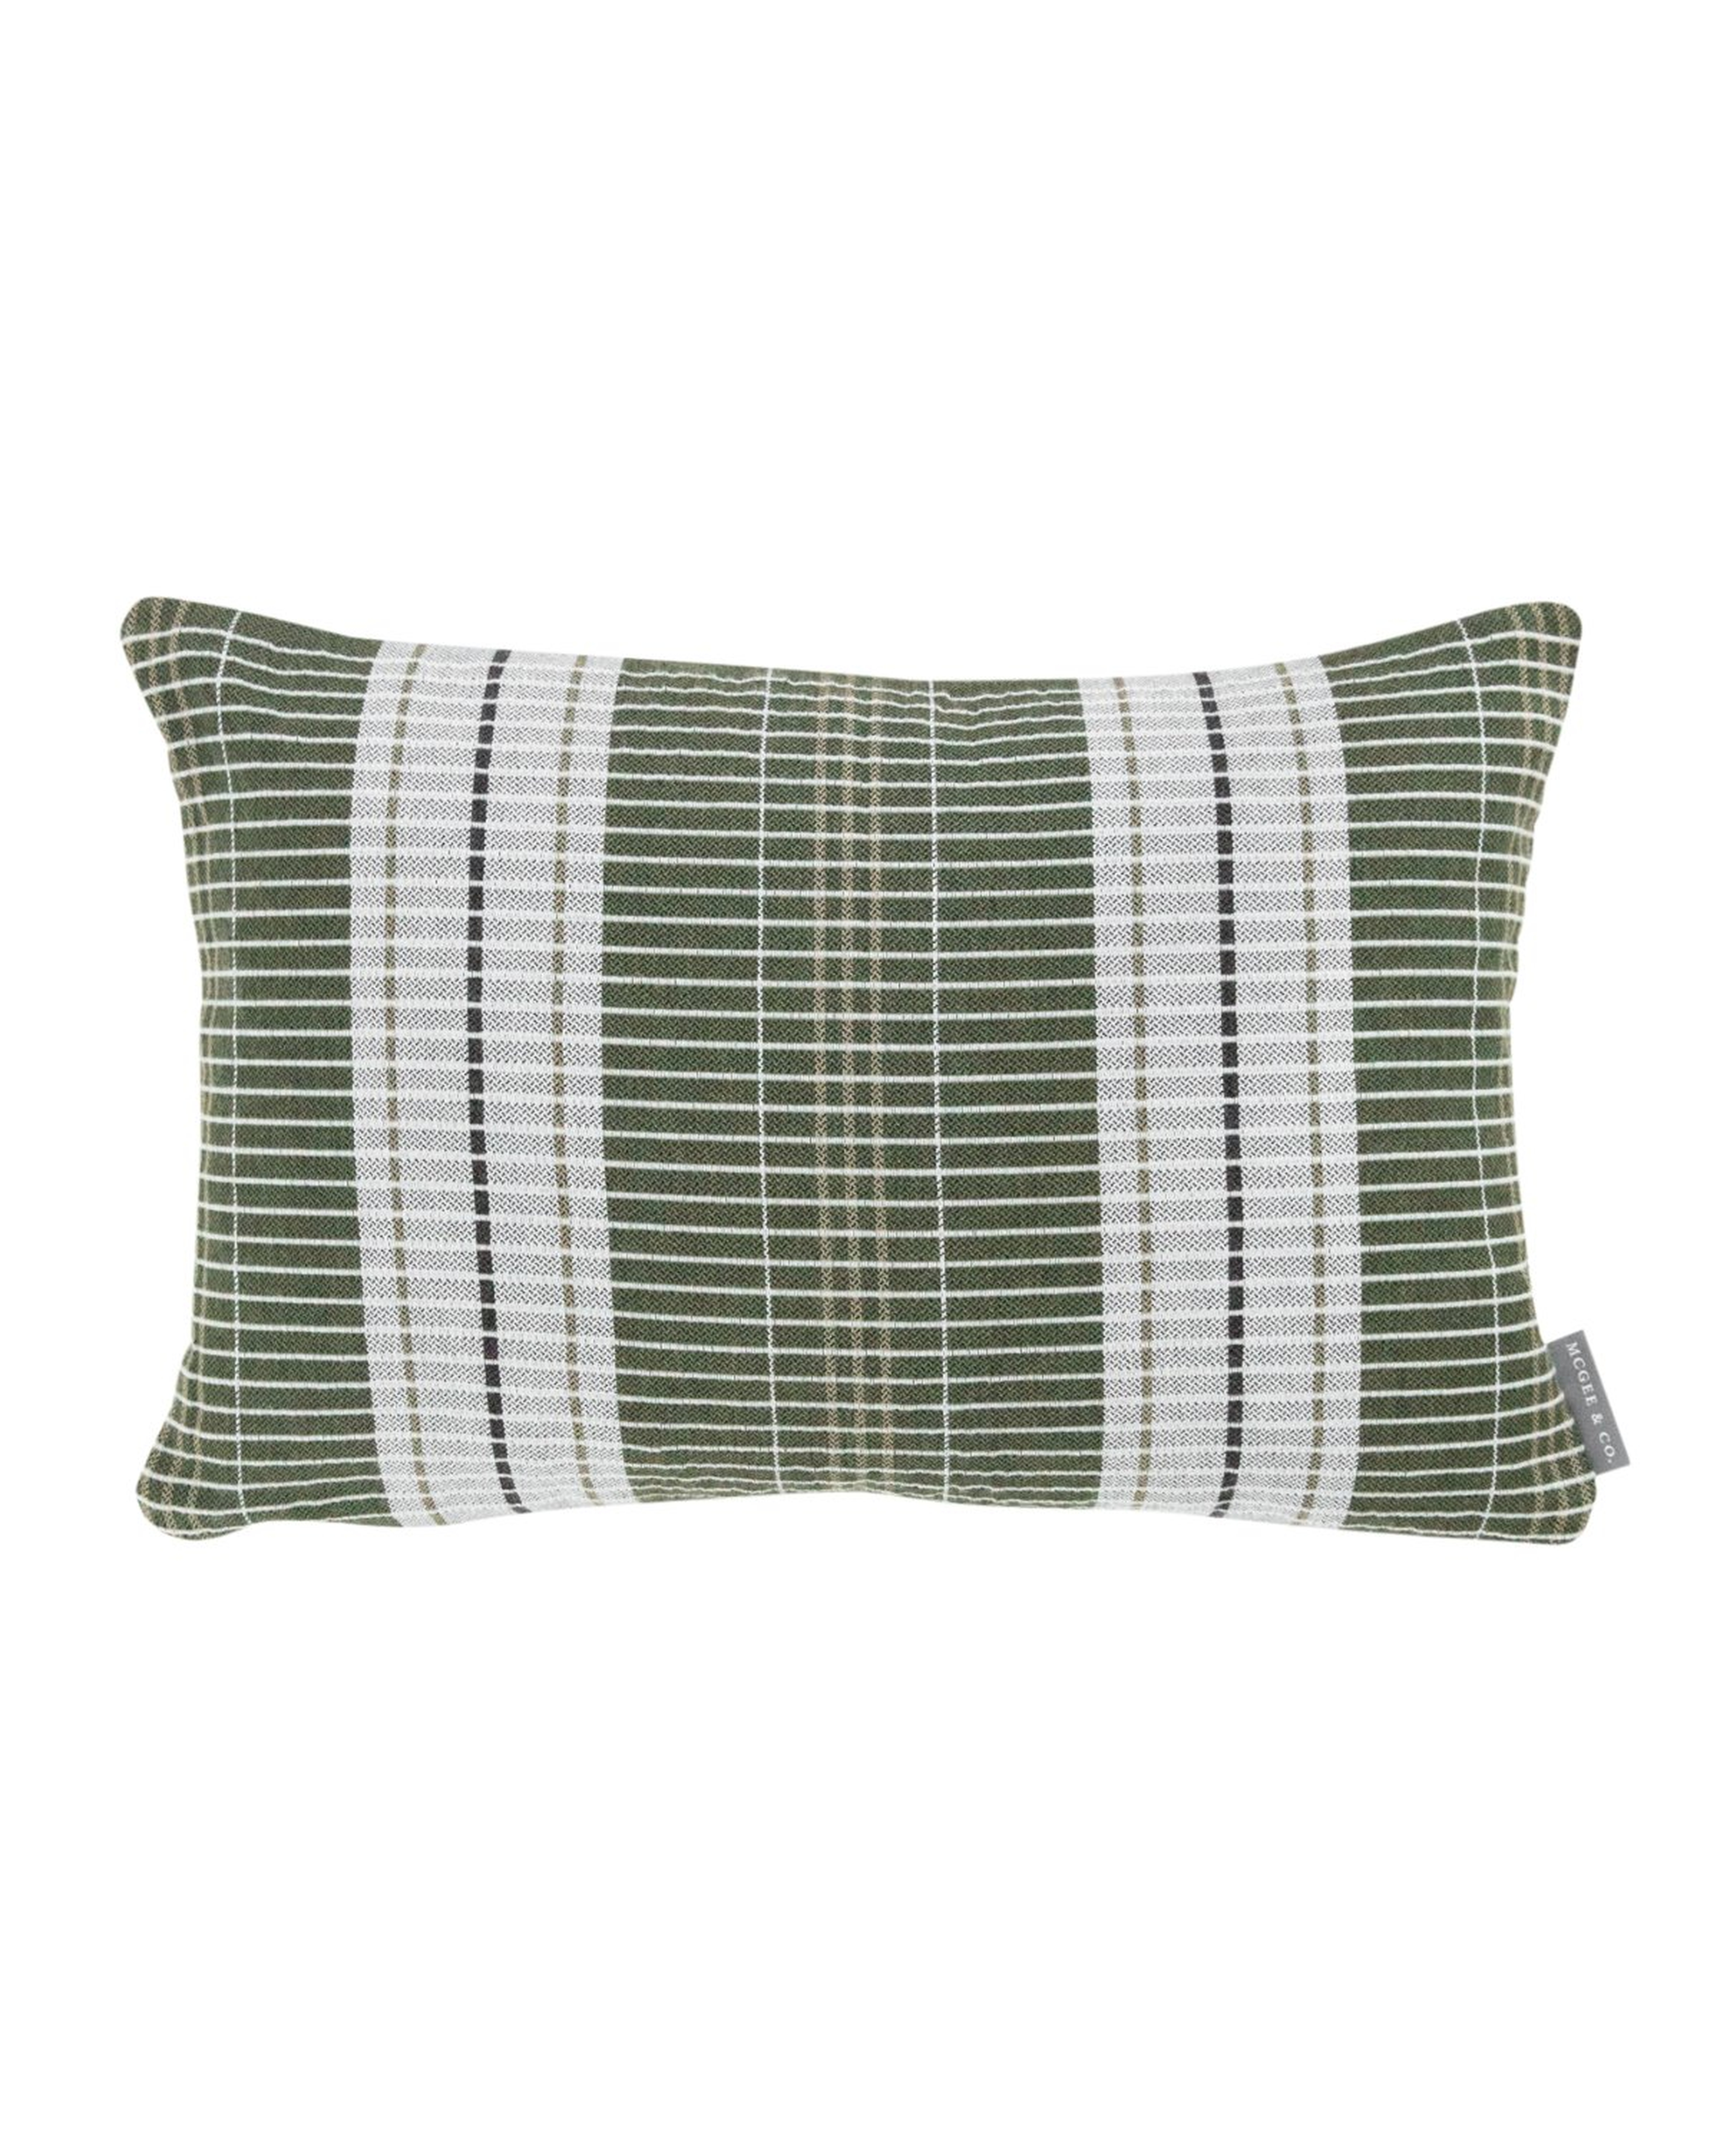 OXFORD WOVEN PLAID PILLOW WITHOUT INSERT, GREEN, 14" x 20" - McGee & Co.